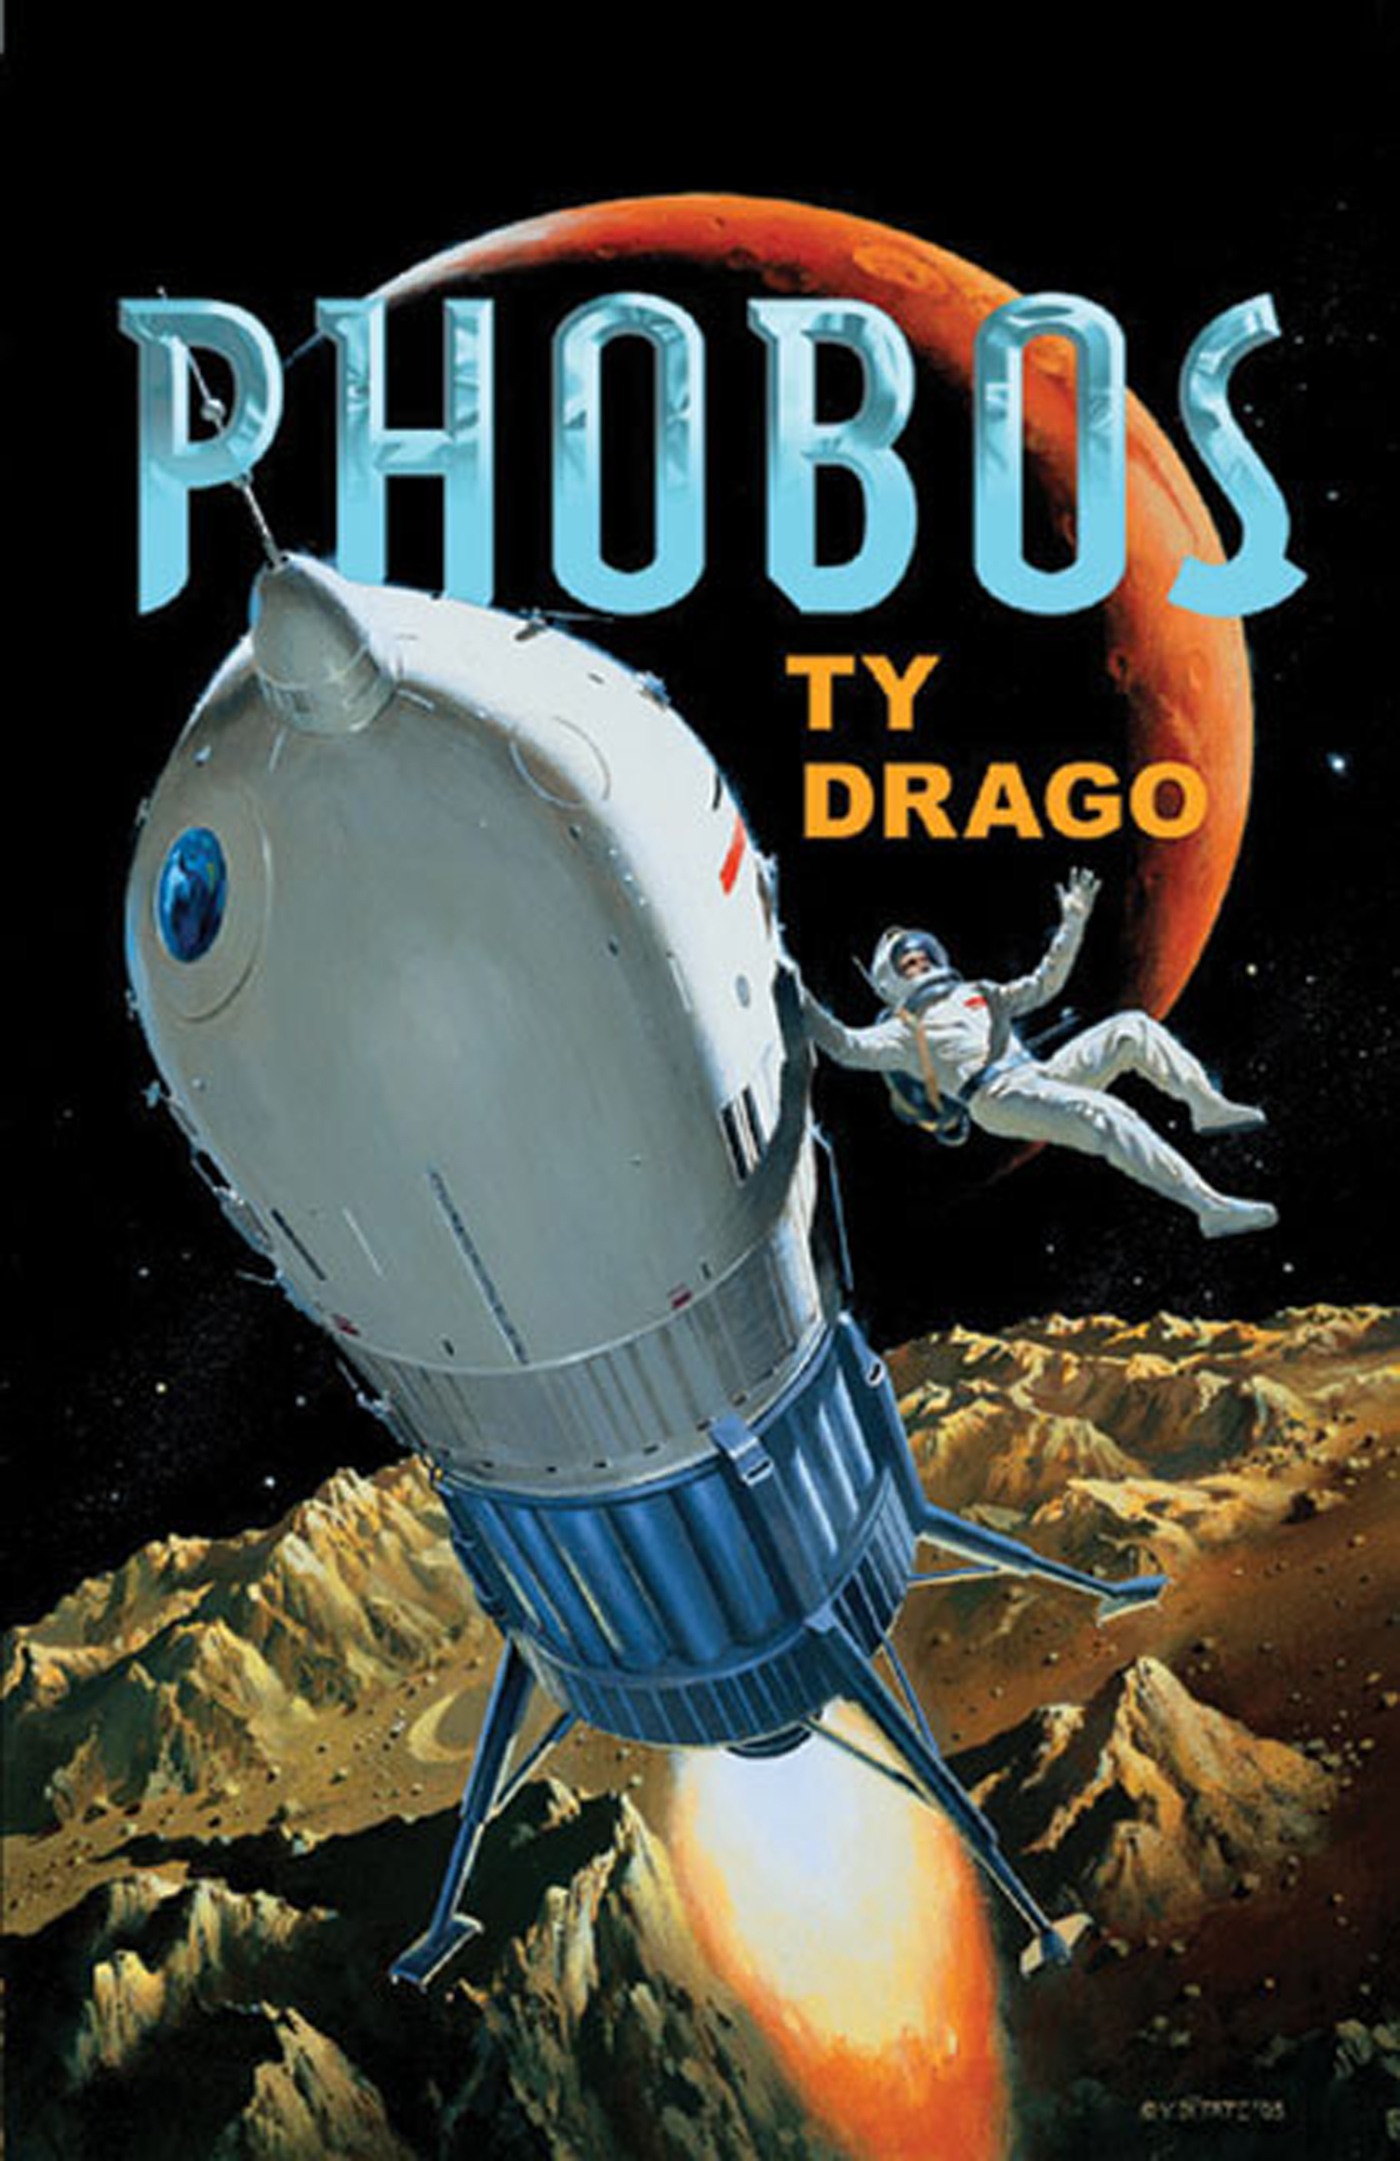 Phobos by Ty Drago